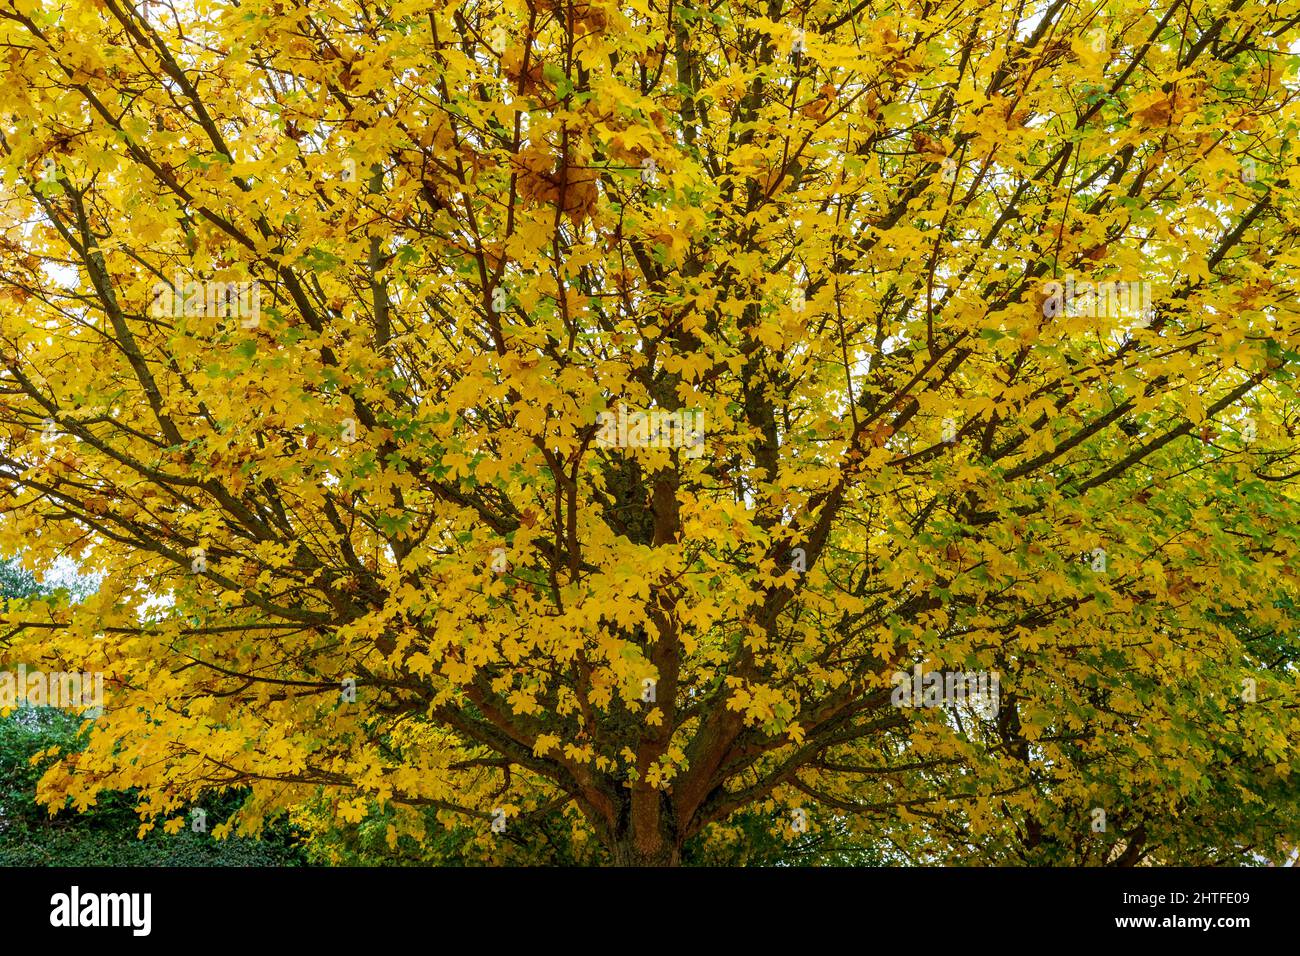 Close up of the tree crown of a field marple tree during the autumn with it's leaves turning yellow. Stock Photo